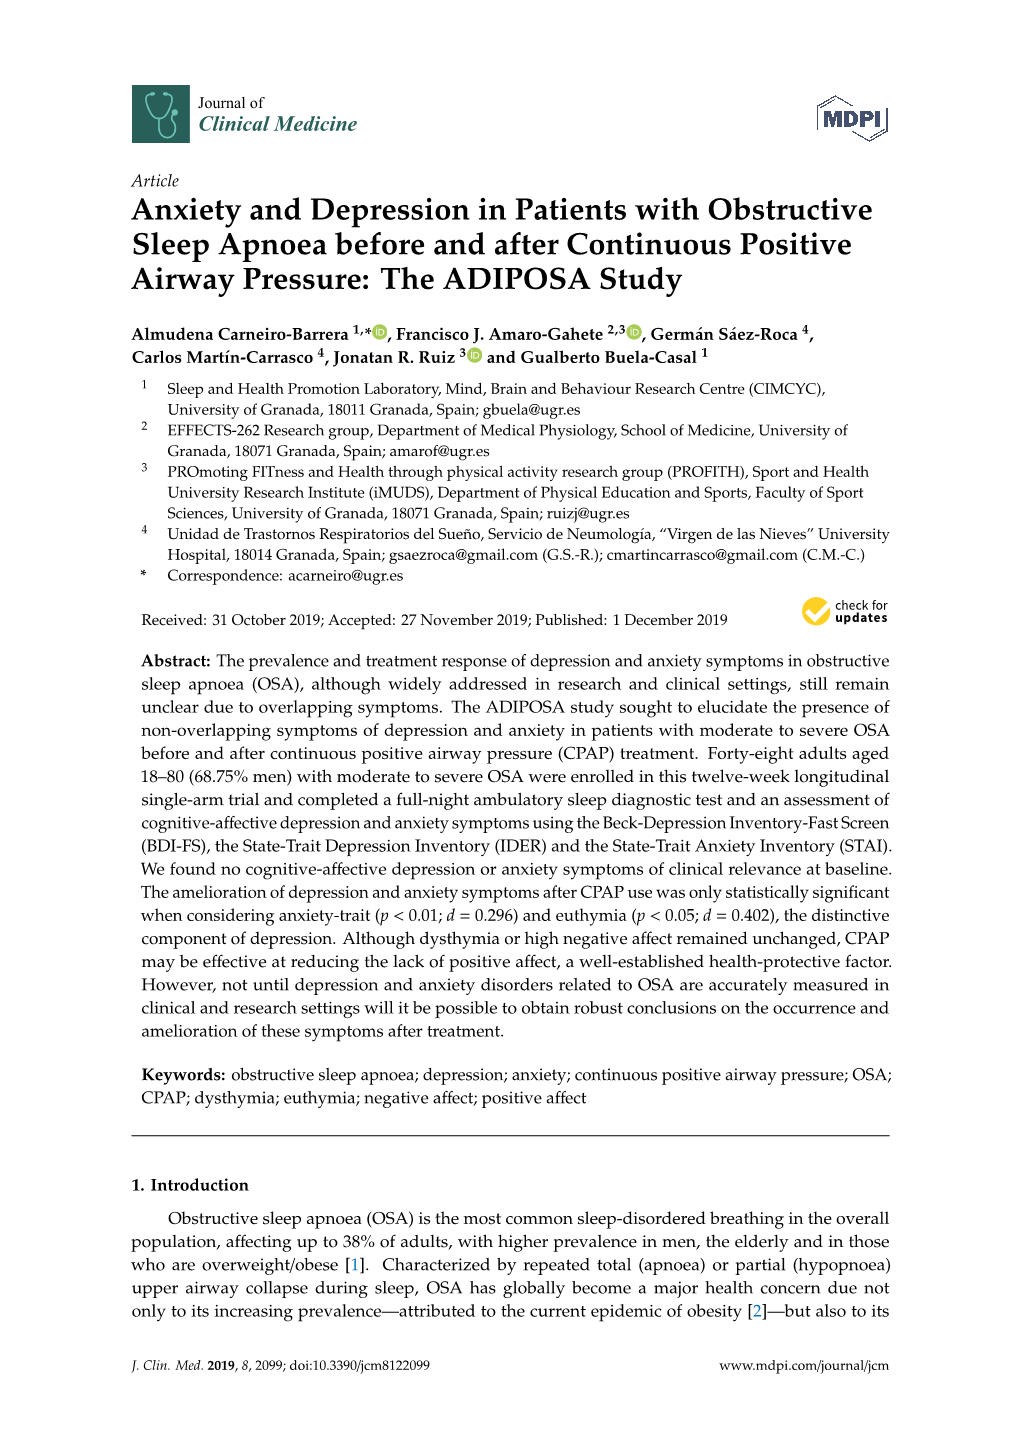 Anxiety and Depression in Patients with Obstructive Sleep Apnoea Before and After Continuous Positive Airway Pressure: the ADIPOSA Study